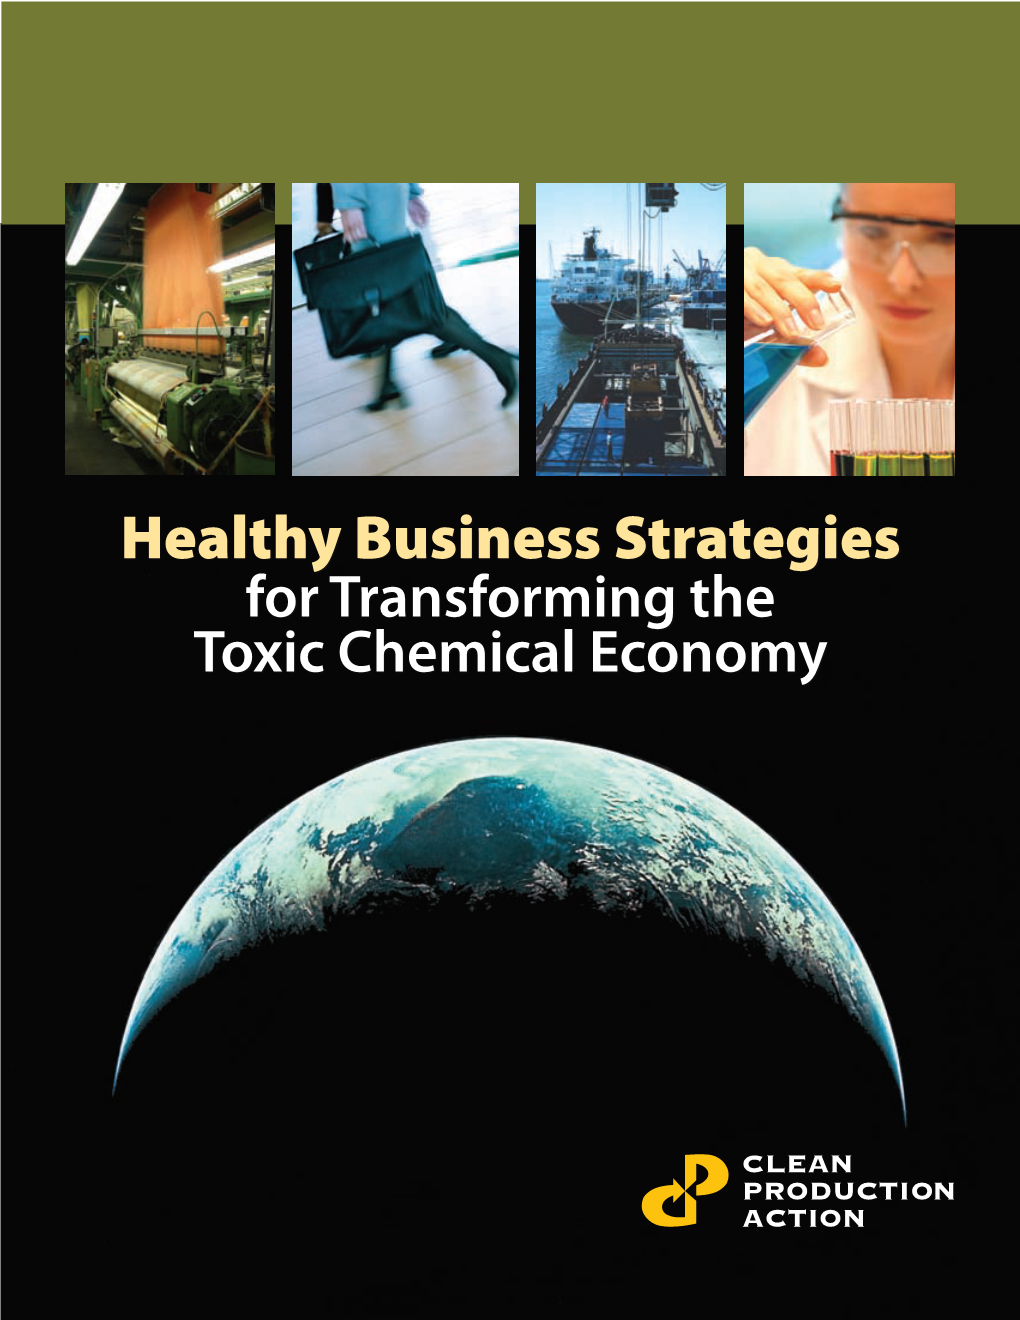 Healthy Business Strategies for Transforming the Toxic Chemical Economy